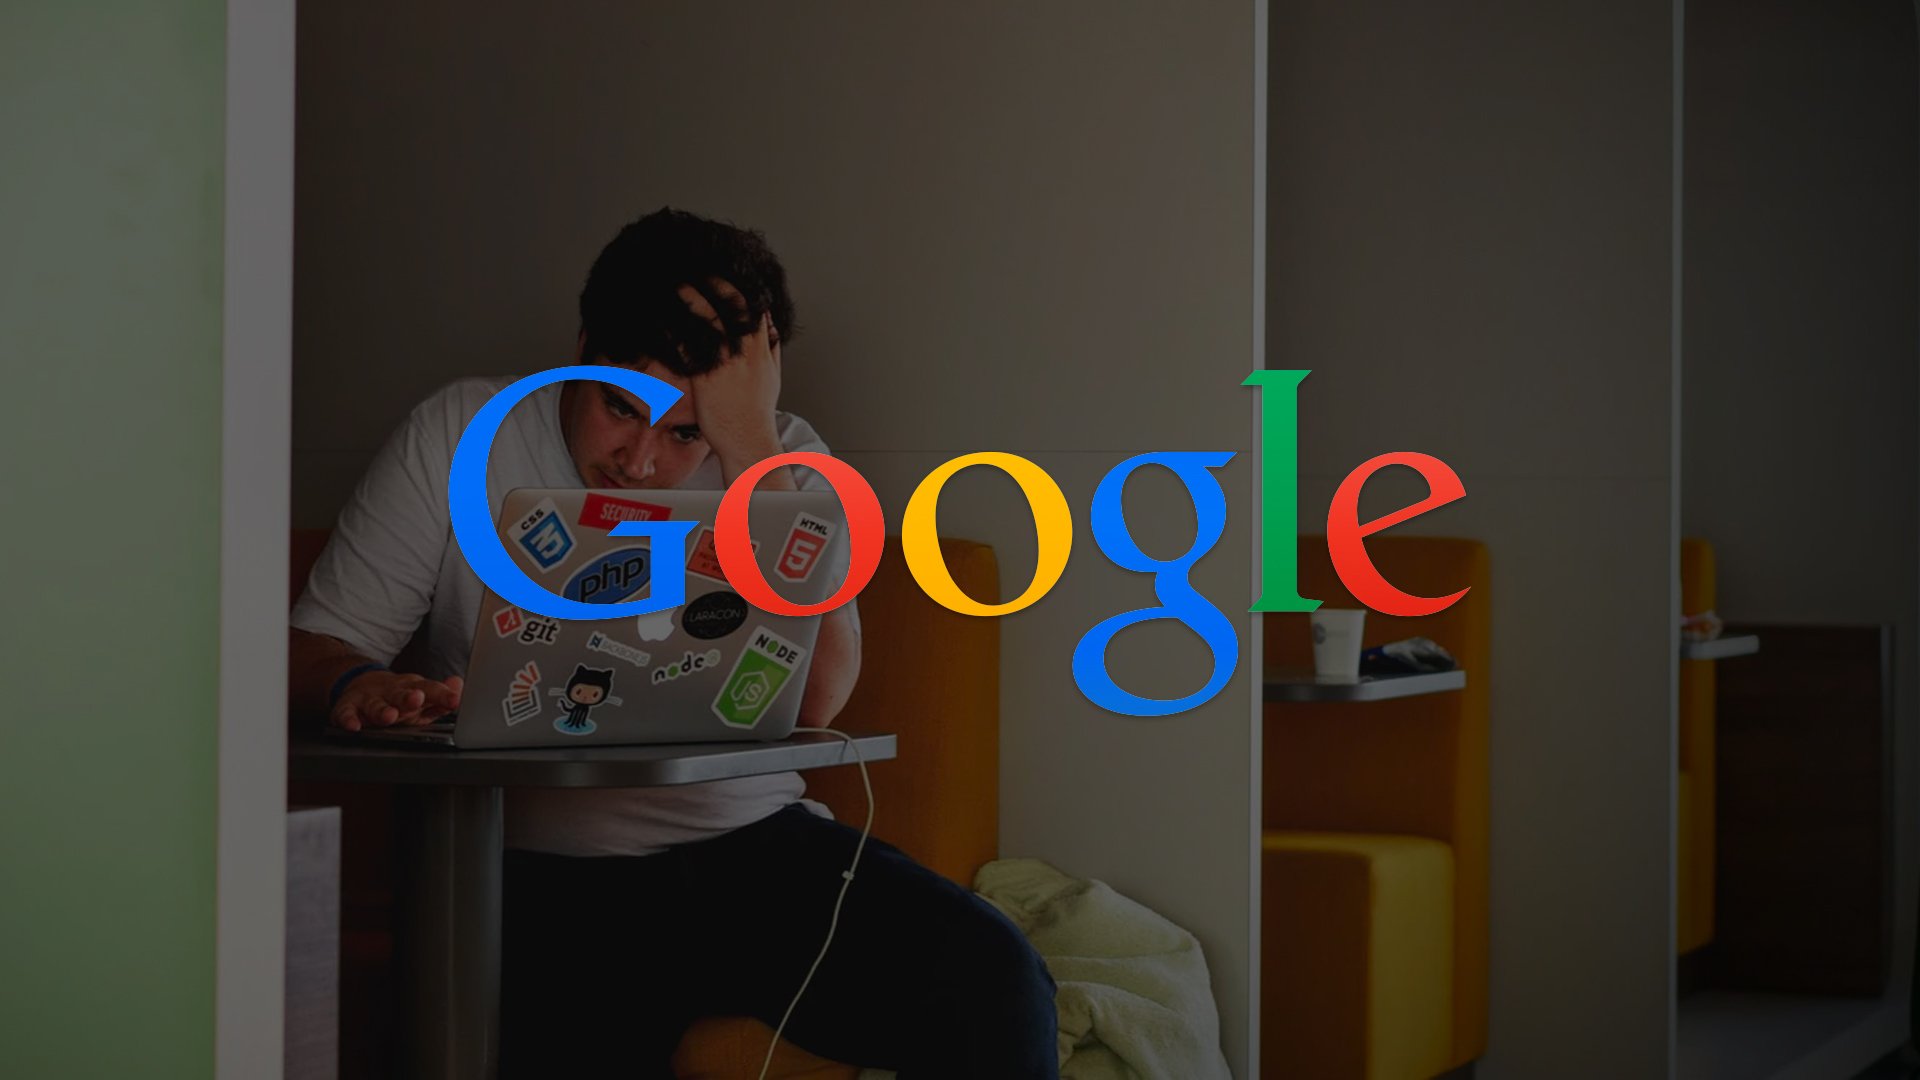 Lessons We Learned From Google’s Employee Dissatisfaction – Are You at Risk Too?